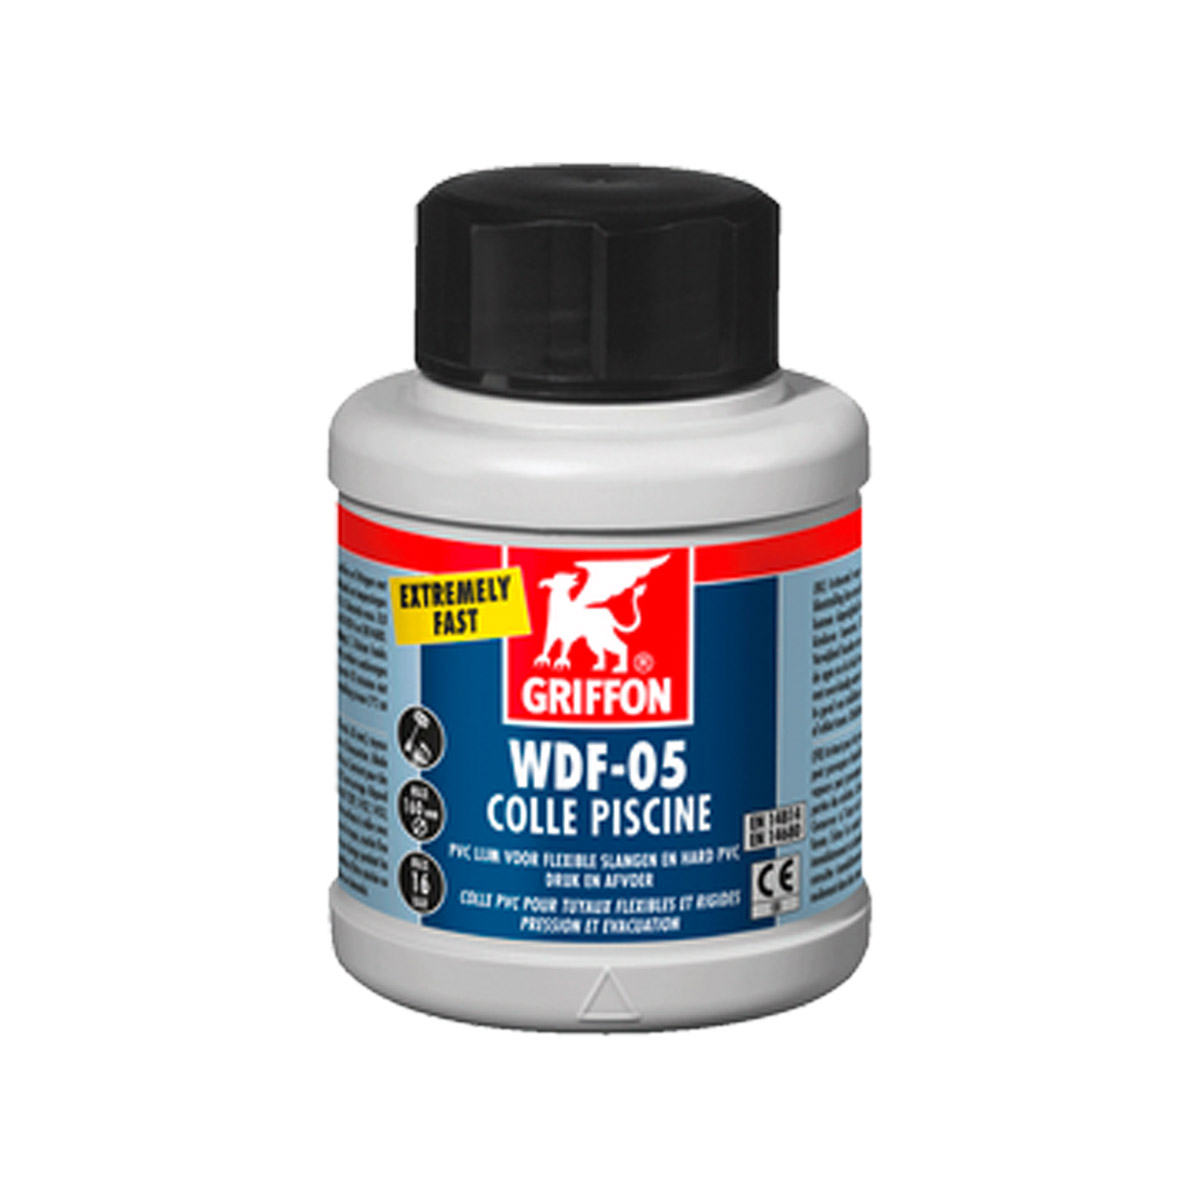 Solvent Cement GRIFFON WDF-05 150ml, with brush Solvent Cement GRIFFON WDF-05 150ml, with brush